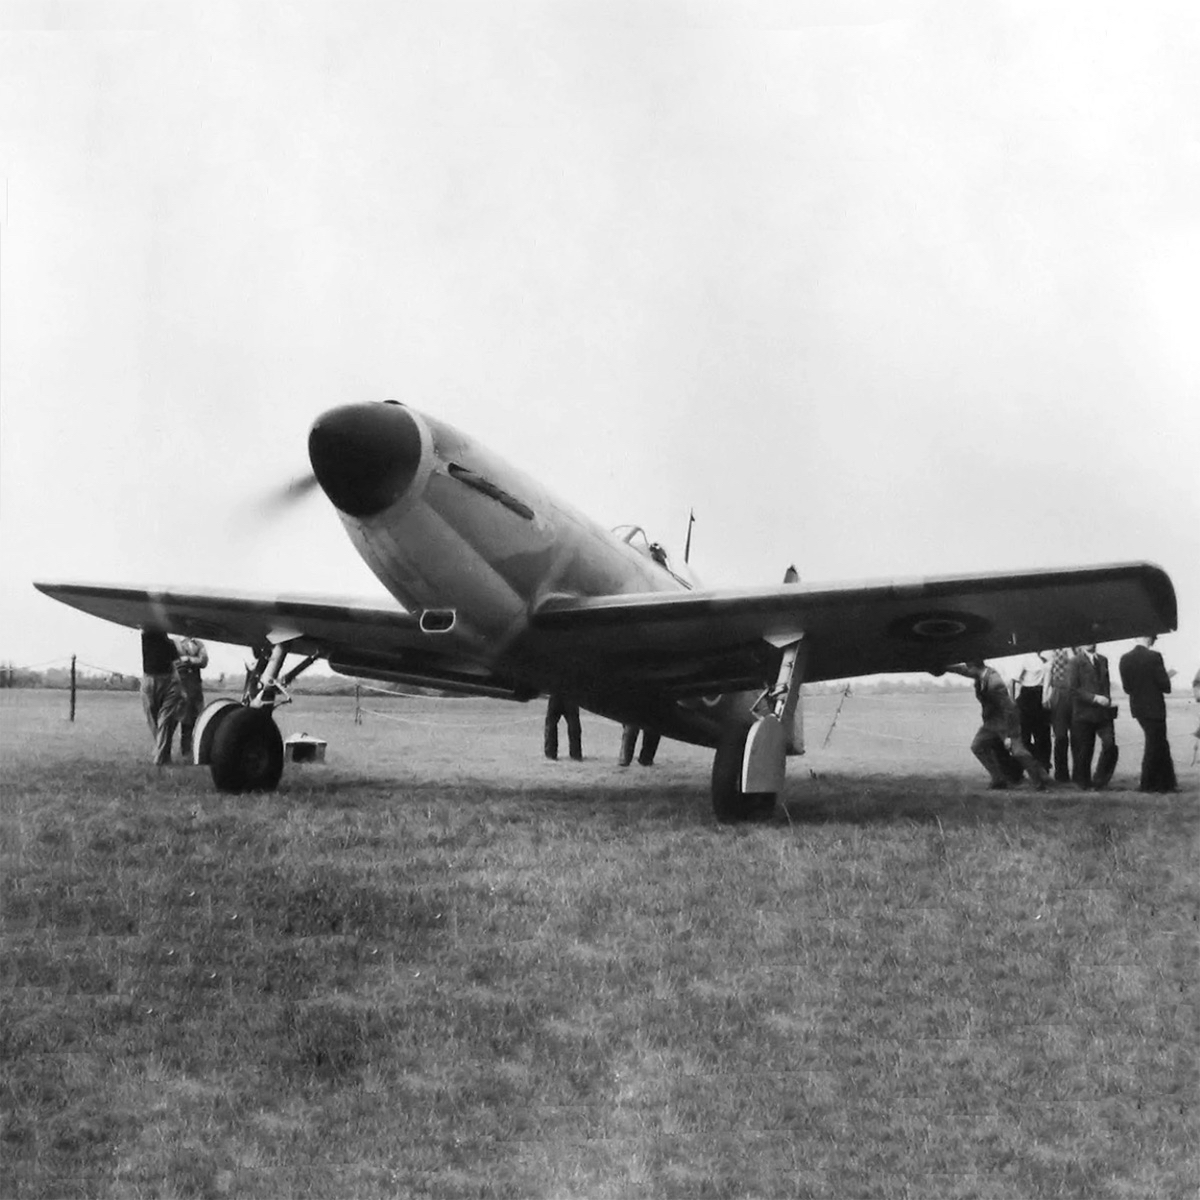 Martin Baker MB3 with Sabre II engine running